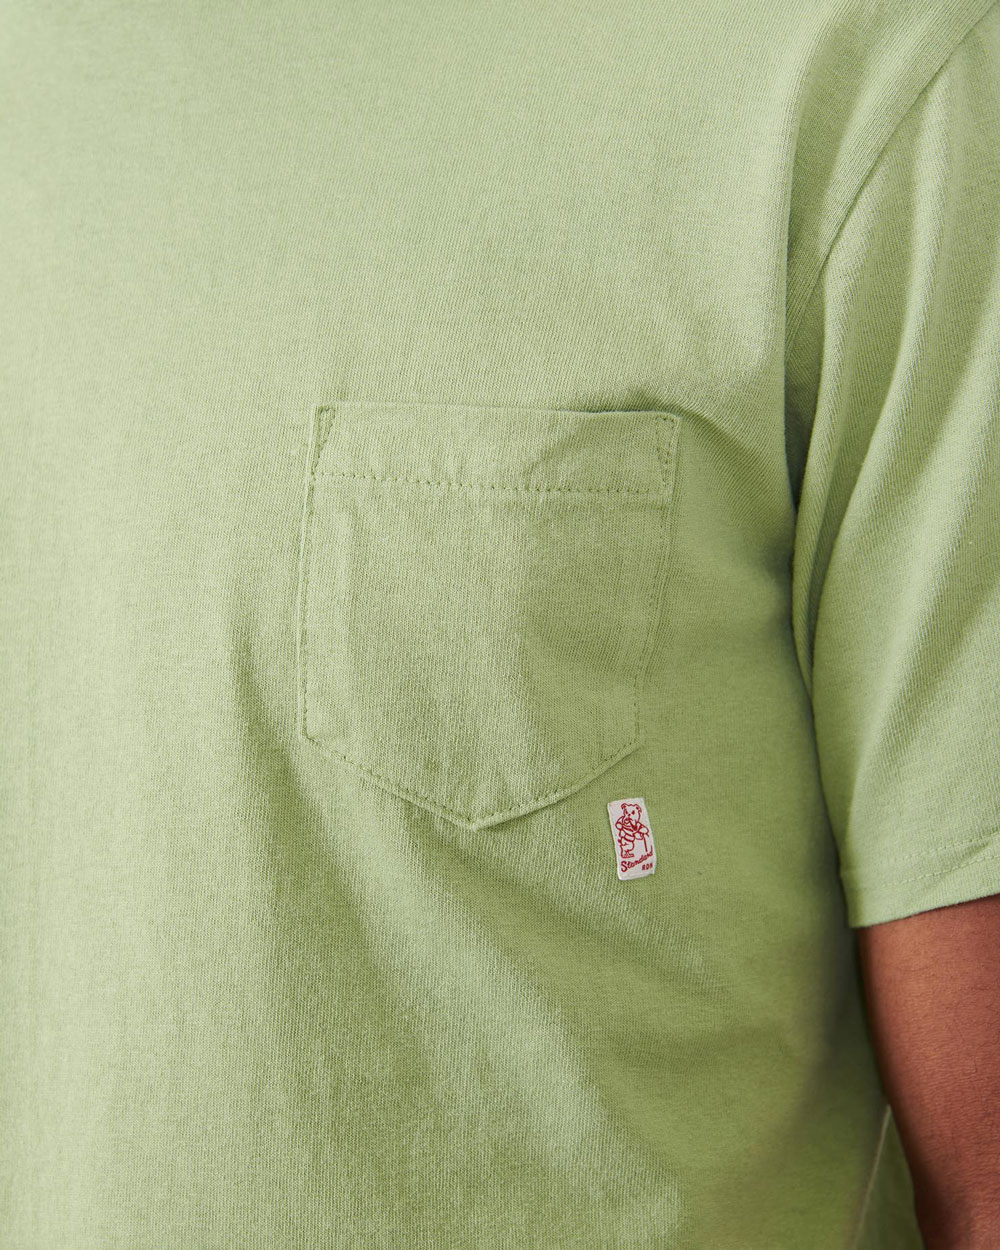 Riding High Standard Pack Pocket Tee - Army Green